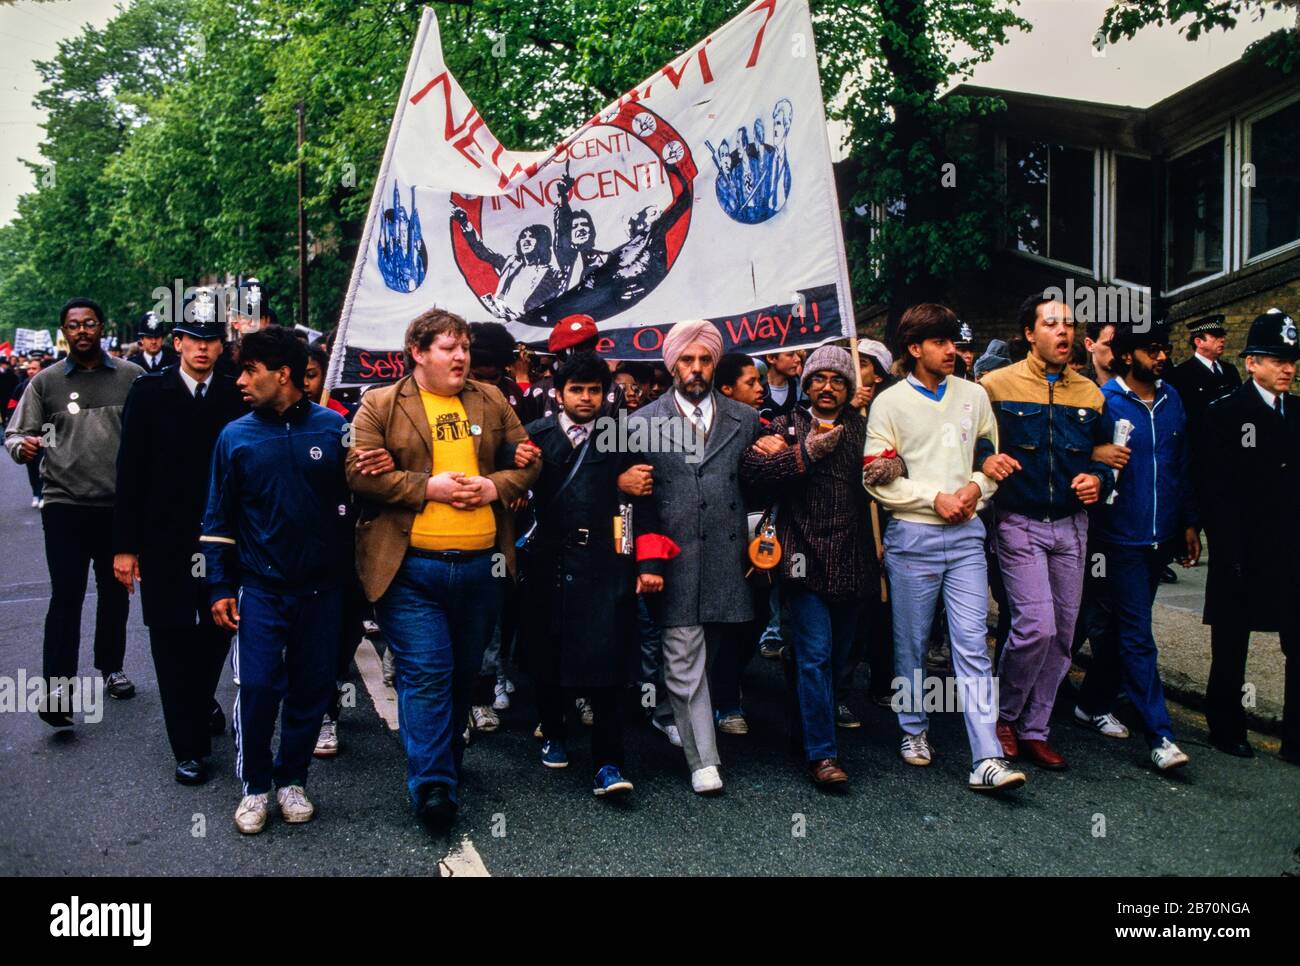 On 11 May 1985, over 2000 people participated in a militant but peaceful demonstration that was allowed to complete its route to Plashet Park. However, in a tense atmosphere, the manhandling by police of one black youth led to confrontation, the emergence of officers on horseback and riot officers who charged into the park. It appeared that this had been deliberately engineered: three to four white men in ordinary clothes were seen throwing sticks at the police; but were later seen behind police lines with police radios. Later, riot officers paraded along Green Street and East ham High Street Stock Photo